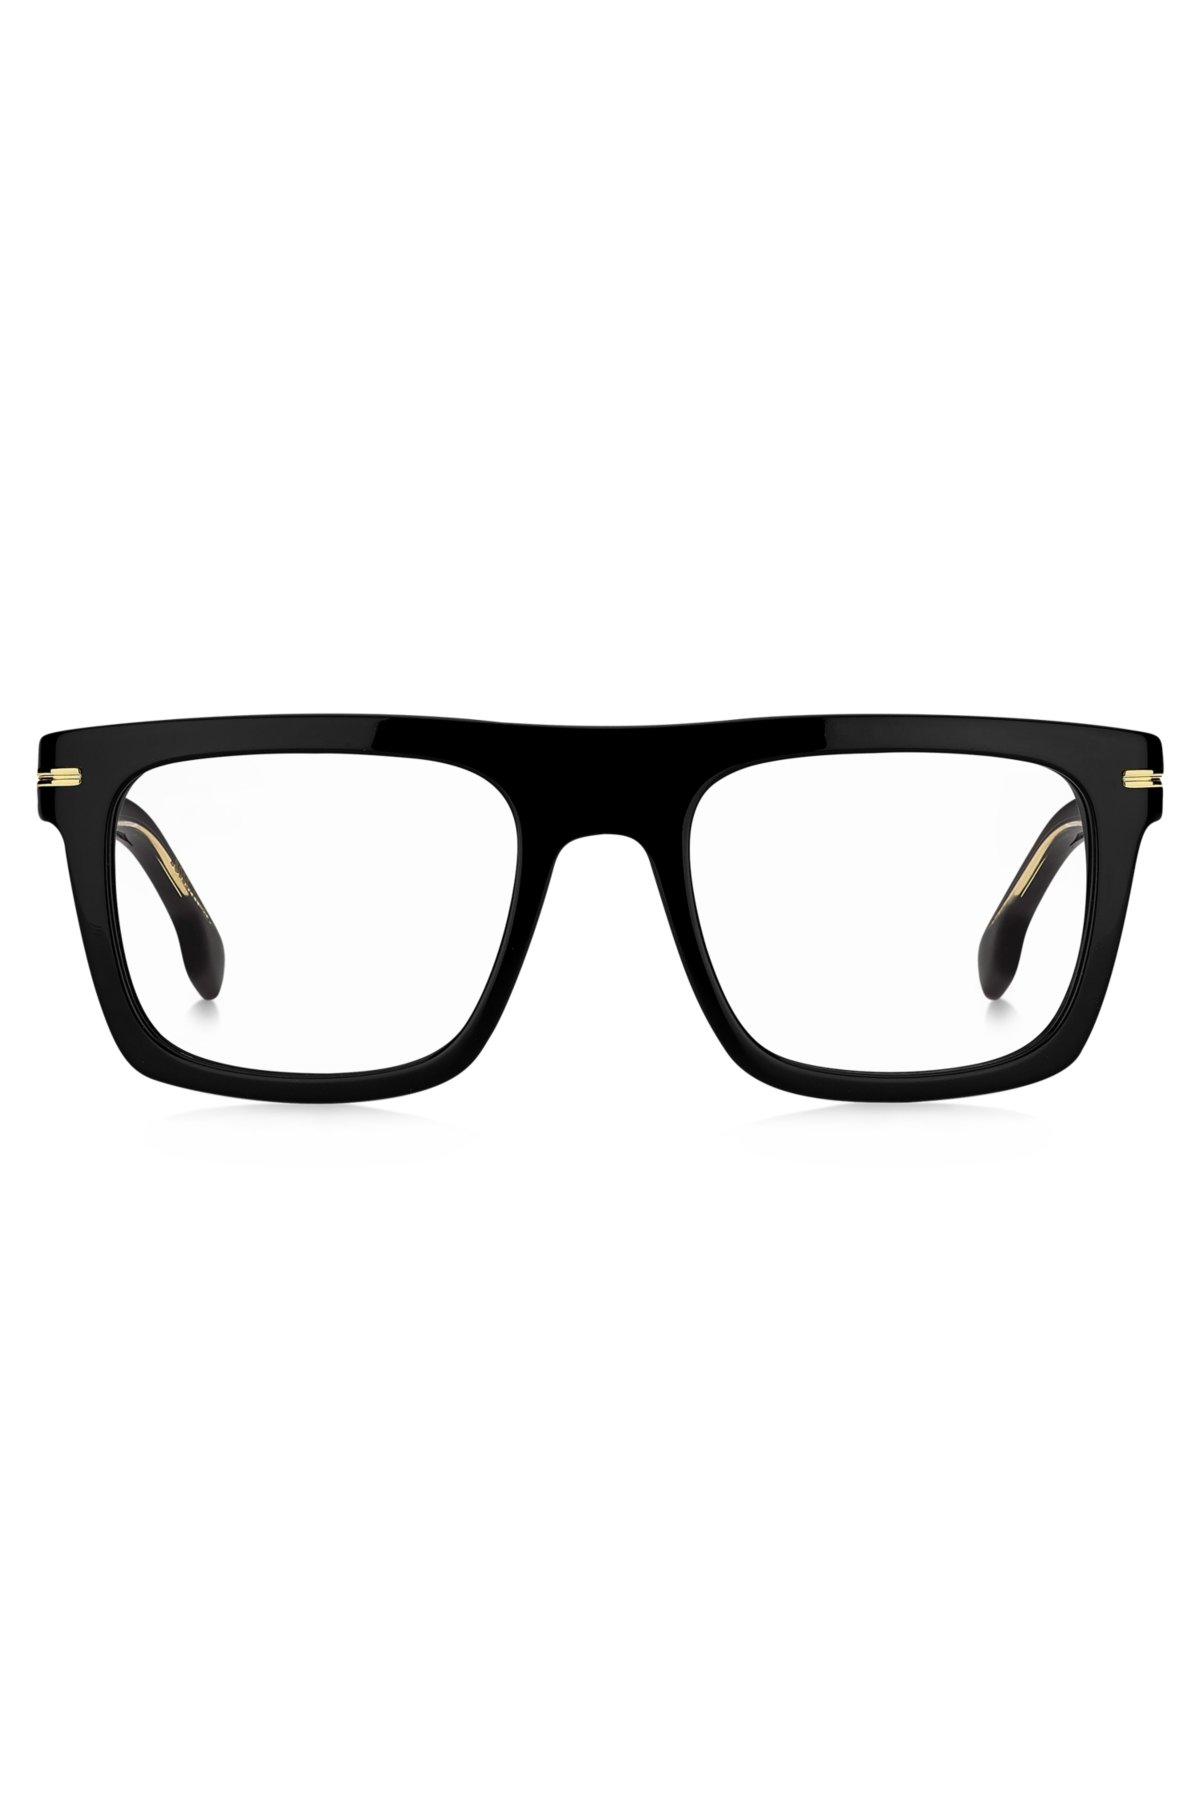 BOSS - Black-acetate optical frames with gold-tone details